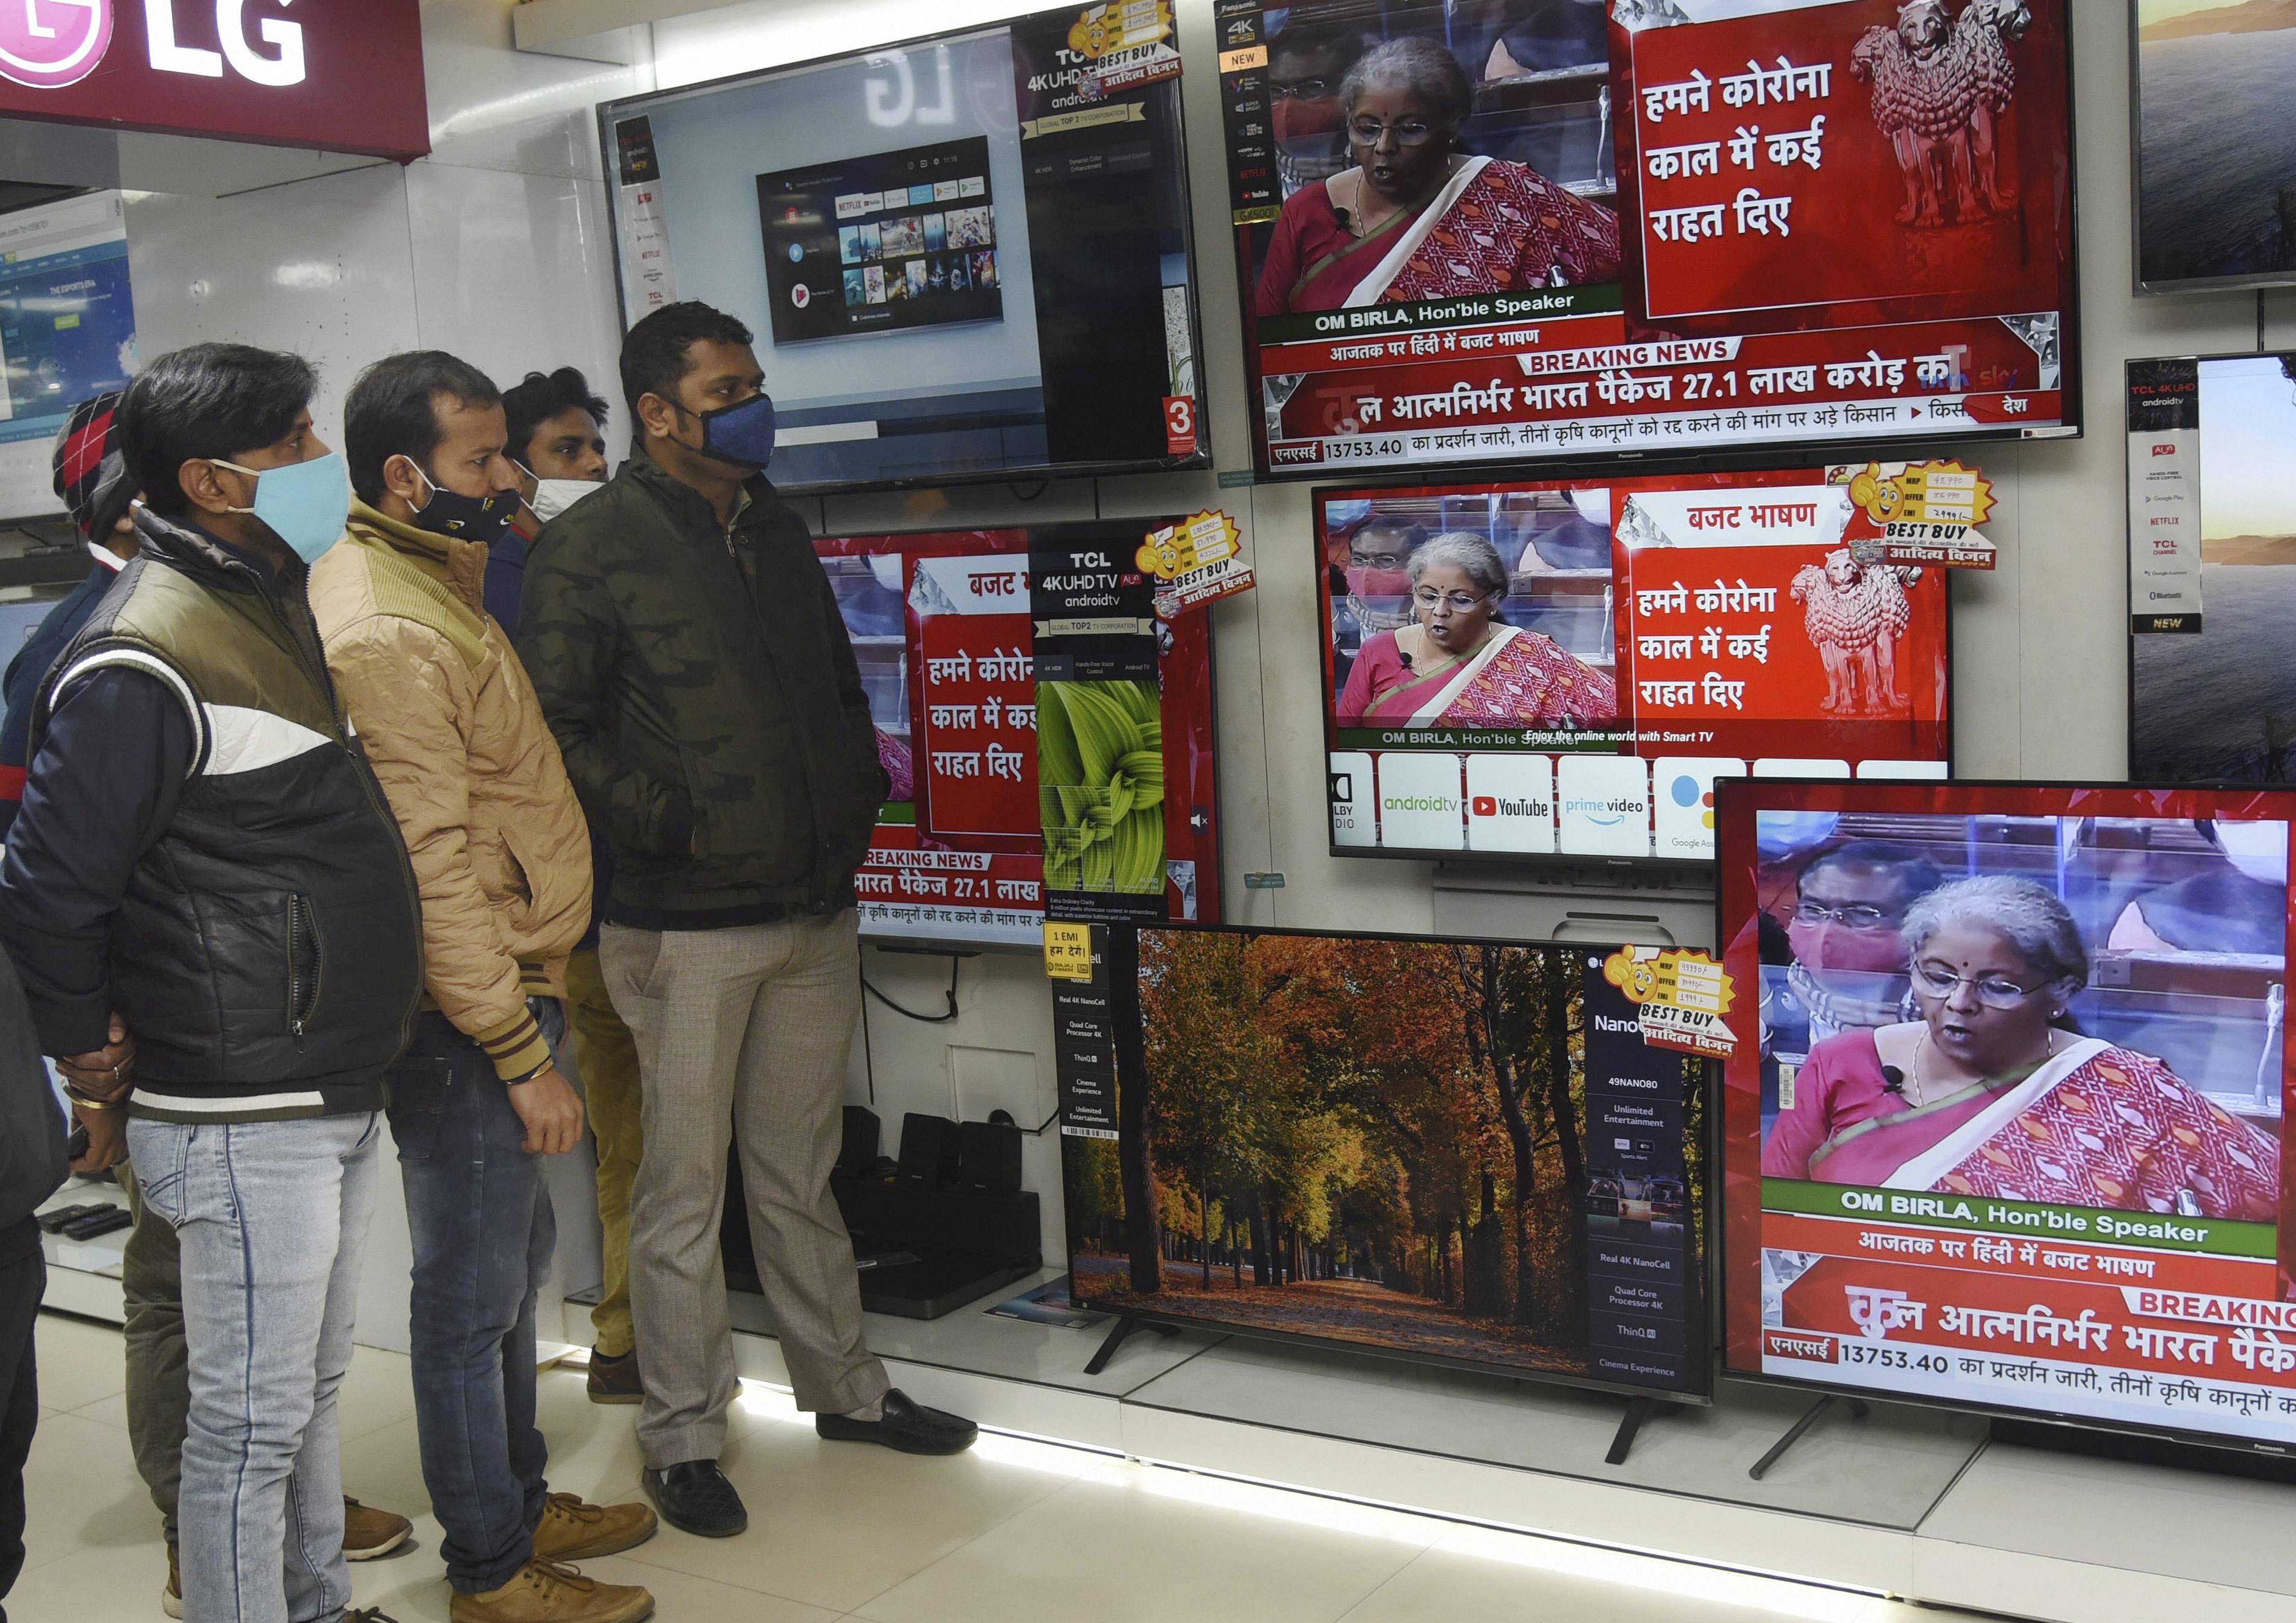 Patna: People watch Finance Minister Nirmala Sitharaman present the Union Budget 2021-21 on television sets, during the Budget Session of Parliament, at an electronics store in Patna, Monday, Feb, 1, 2021. (PTI Photo)(PTI02_01_2021_000061B)